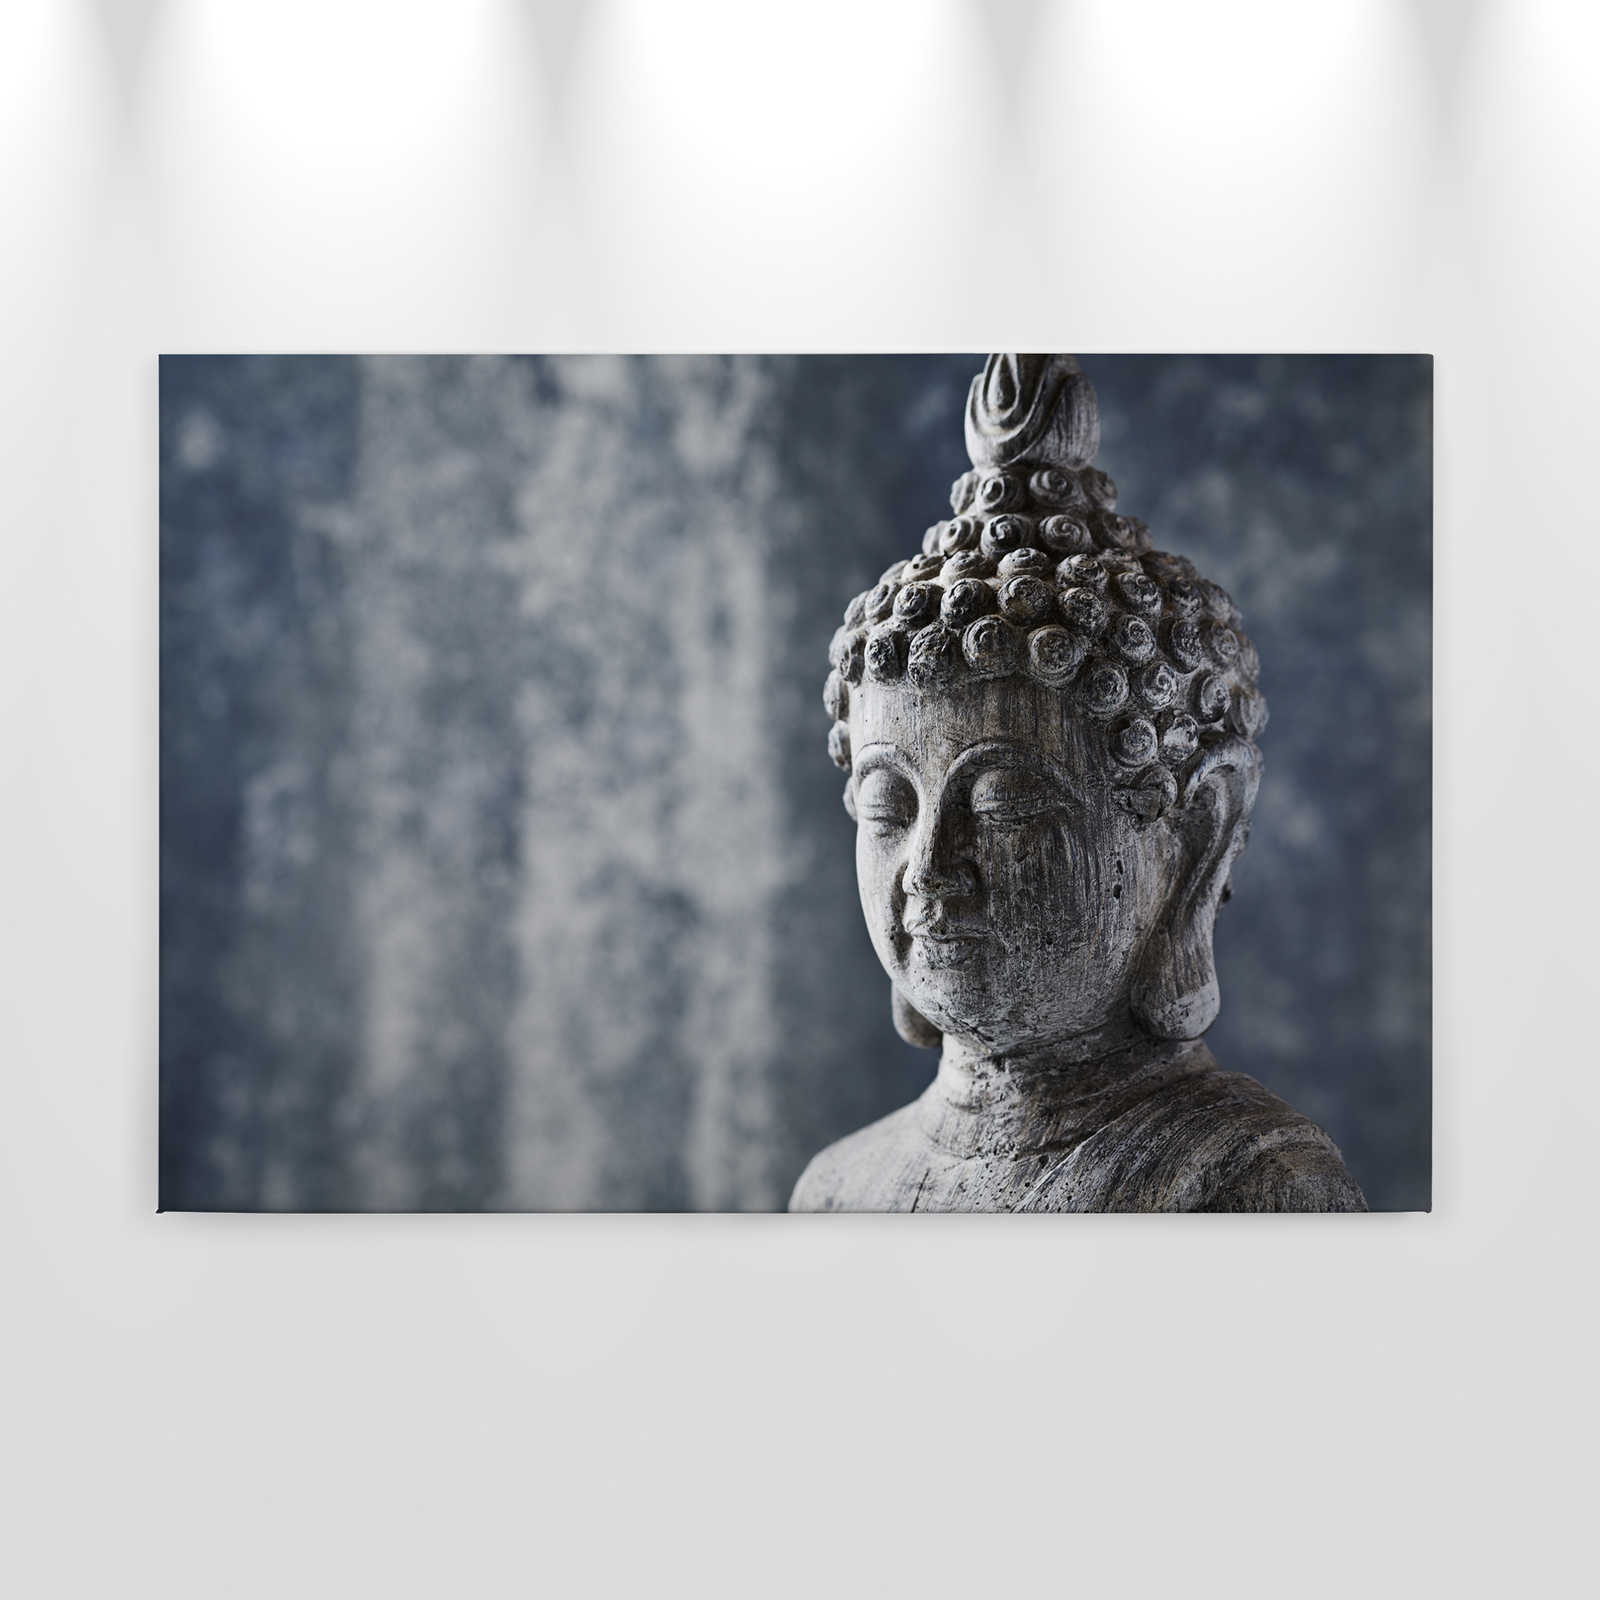             Leiwand Asian Stone Sculpture - 0.90 m x 0.60 m
        